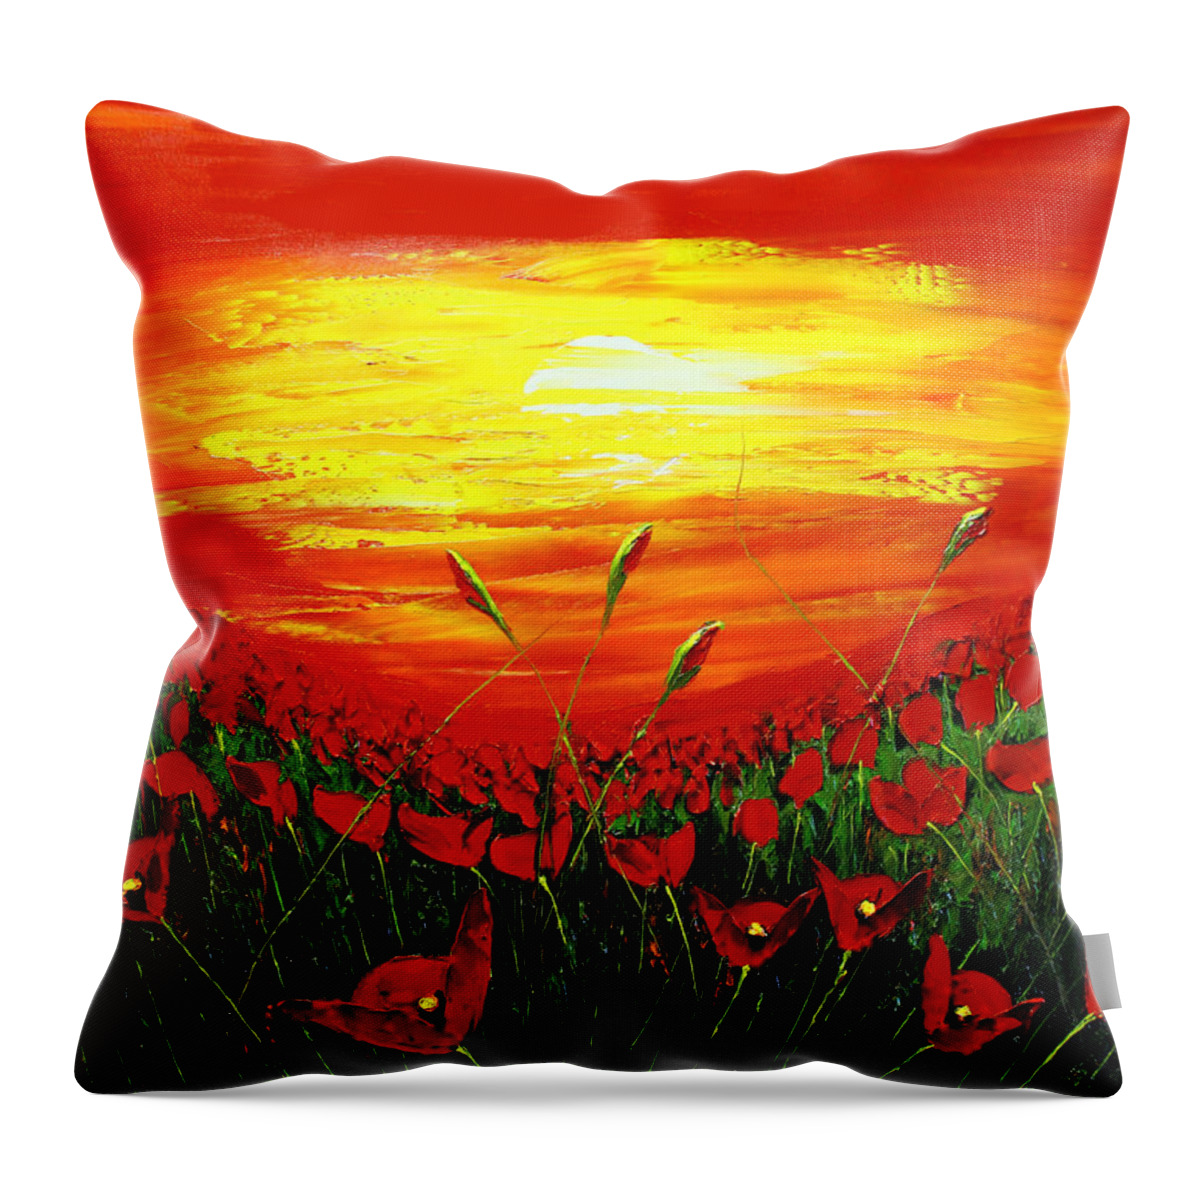  Throw Pillow featuring the painting Field Of Red Poppies At Dusk #2 by James Dunbar